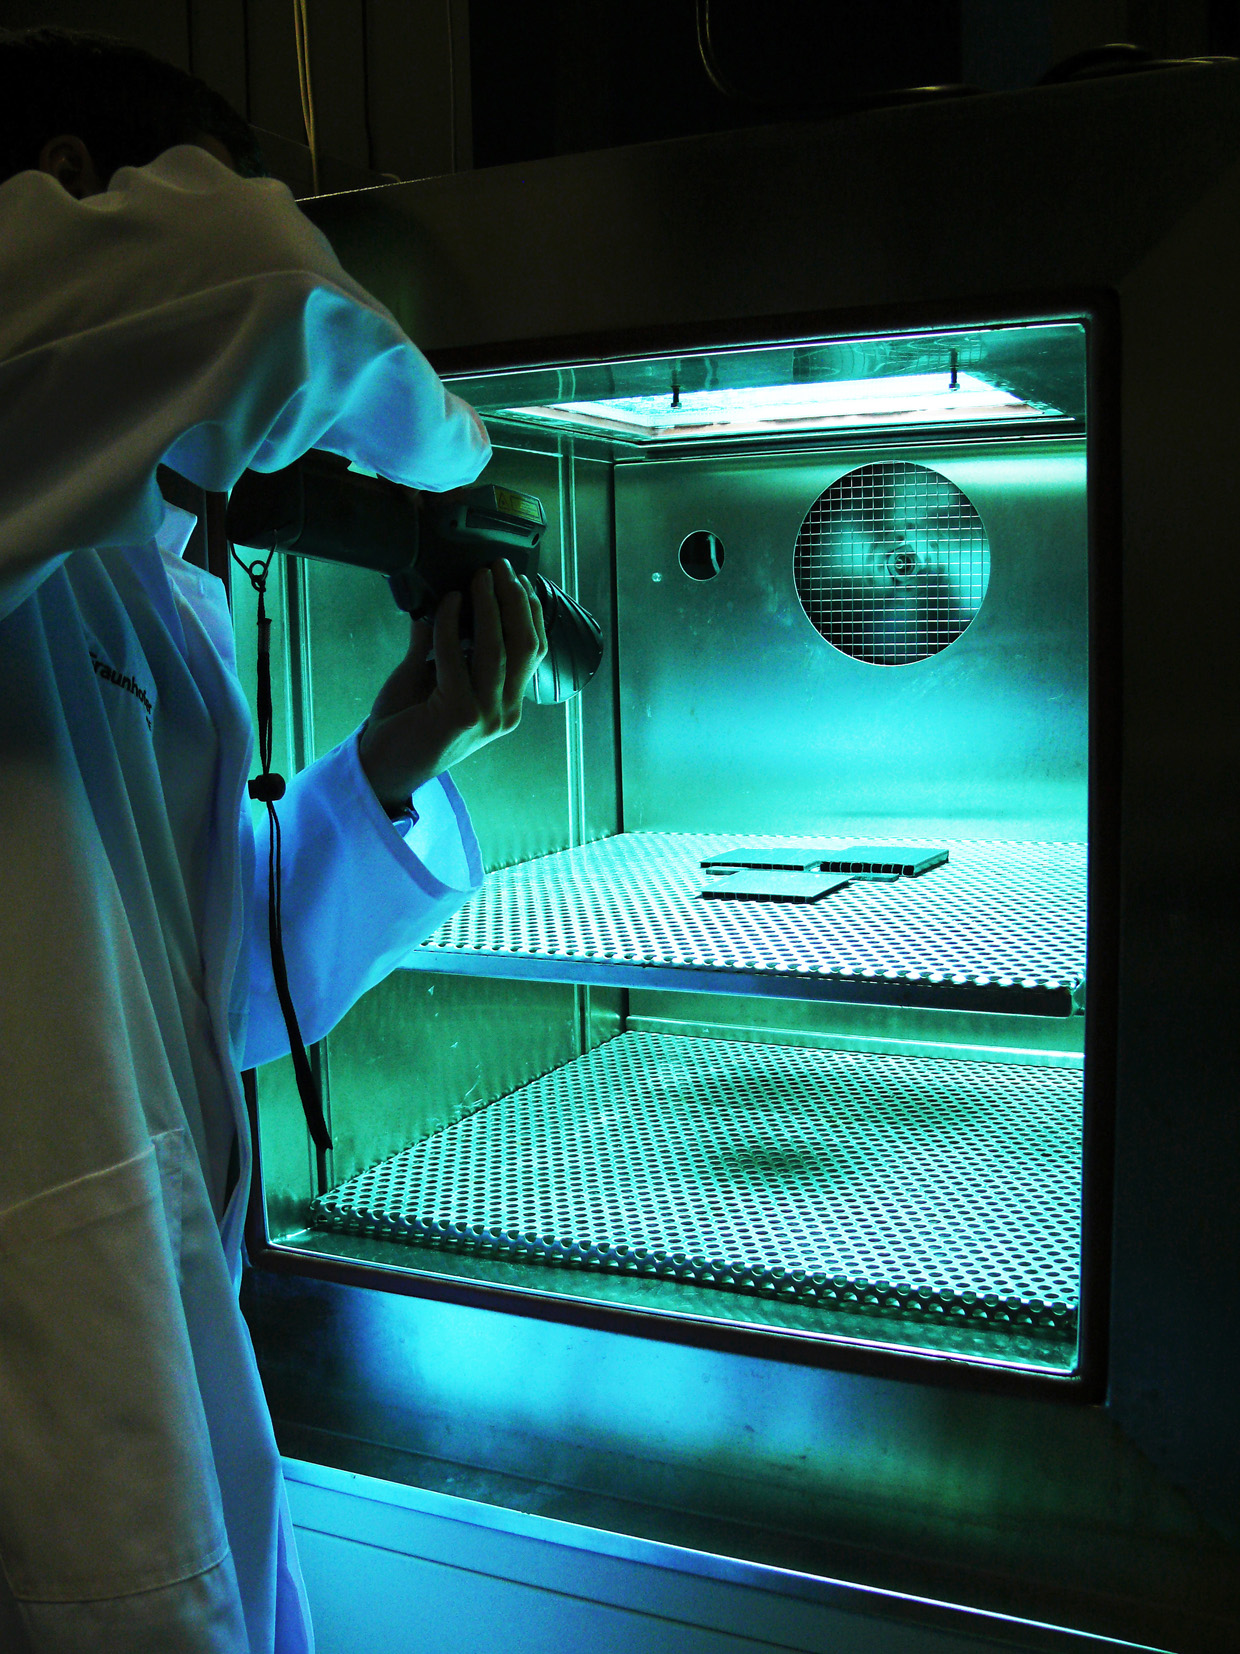 Scientists at Fraunhofer ISE using a thermal imaging camera to check the surface temperature of a polymer sample during UV aging in a climatic chamber.